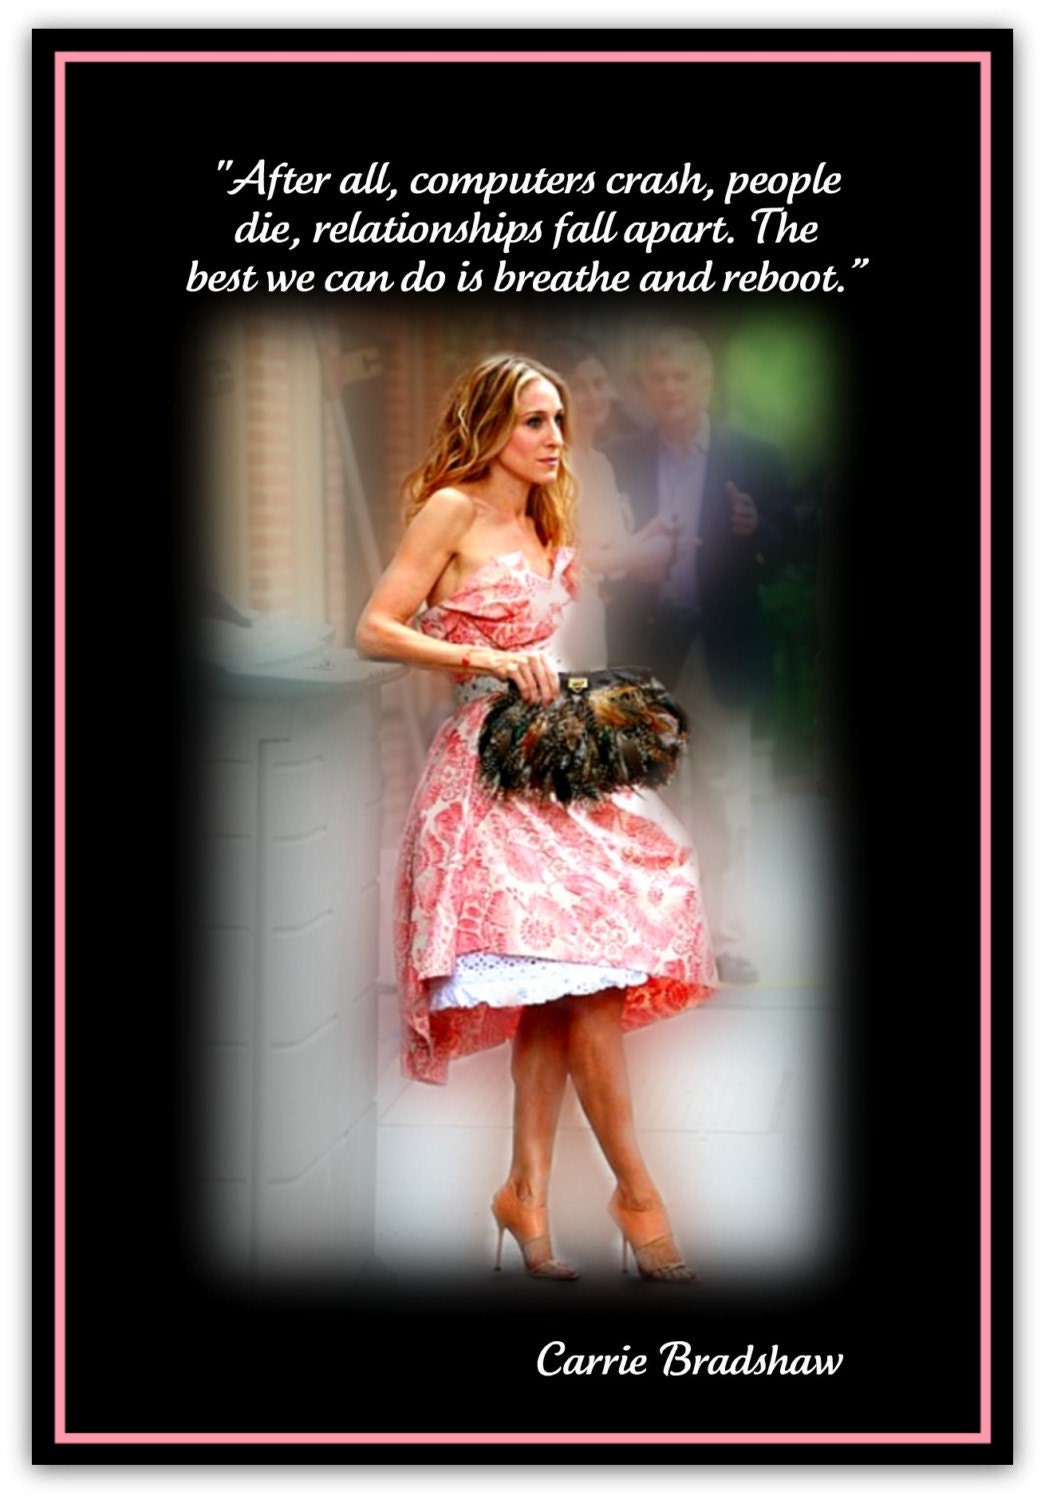 Quotes From Carrie Bradshaw